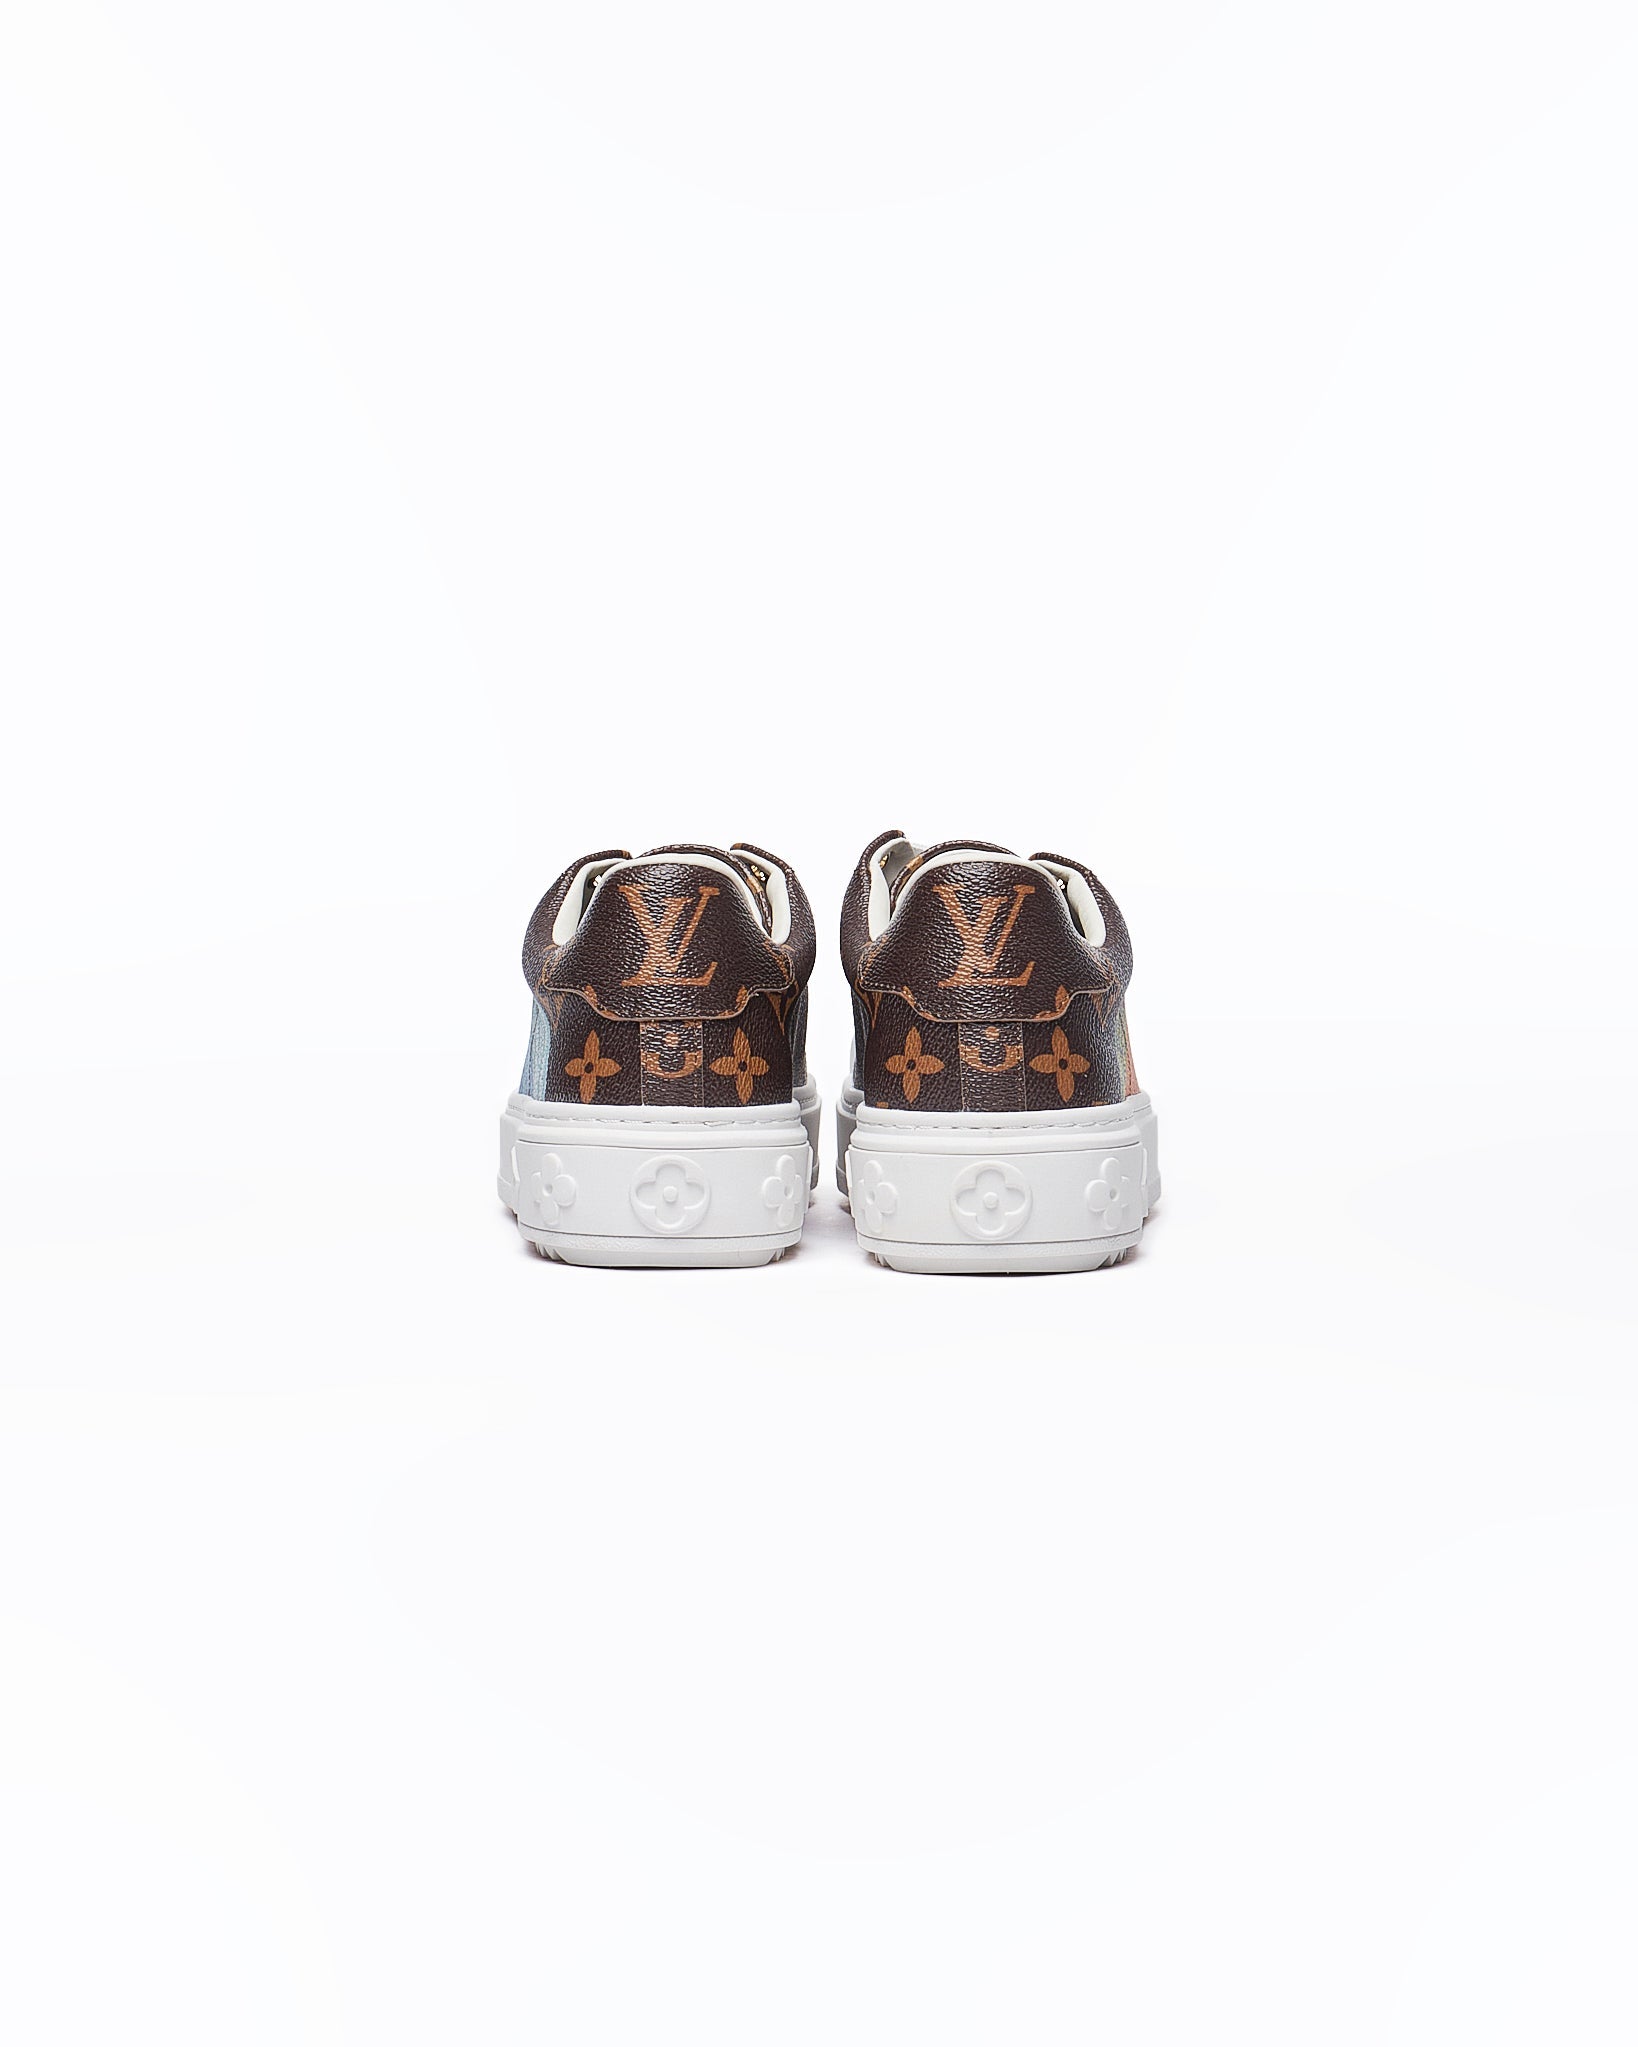 LV Monogram Lady Brown Sneakers Shoes 105.90 - MOI OUTFIT